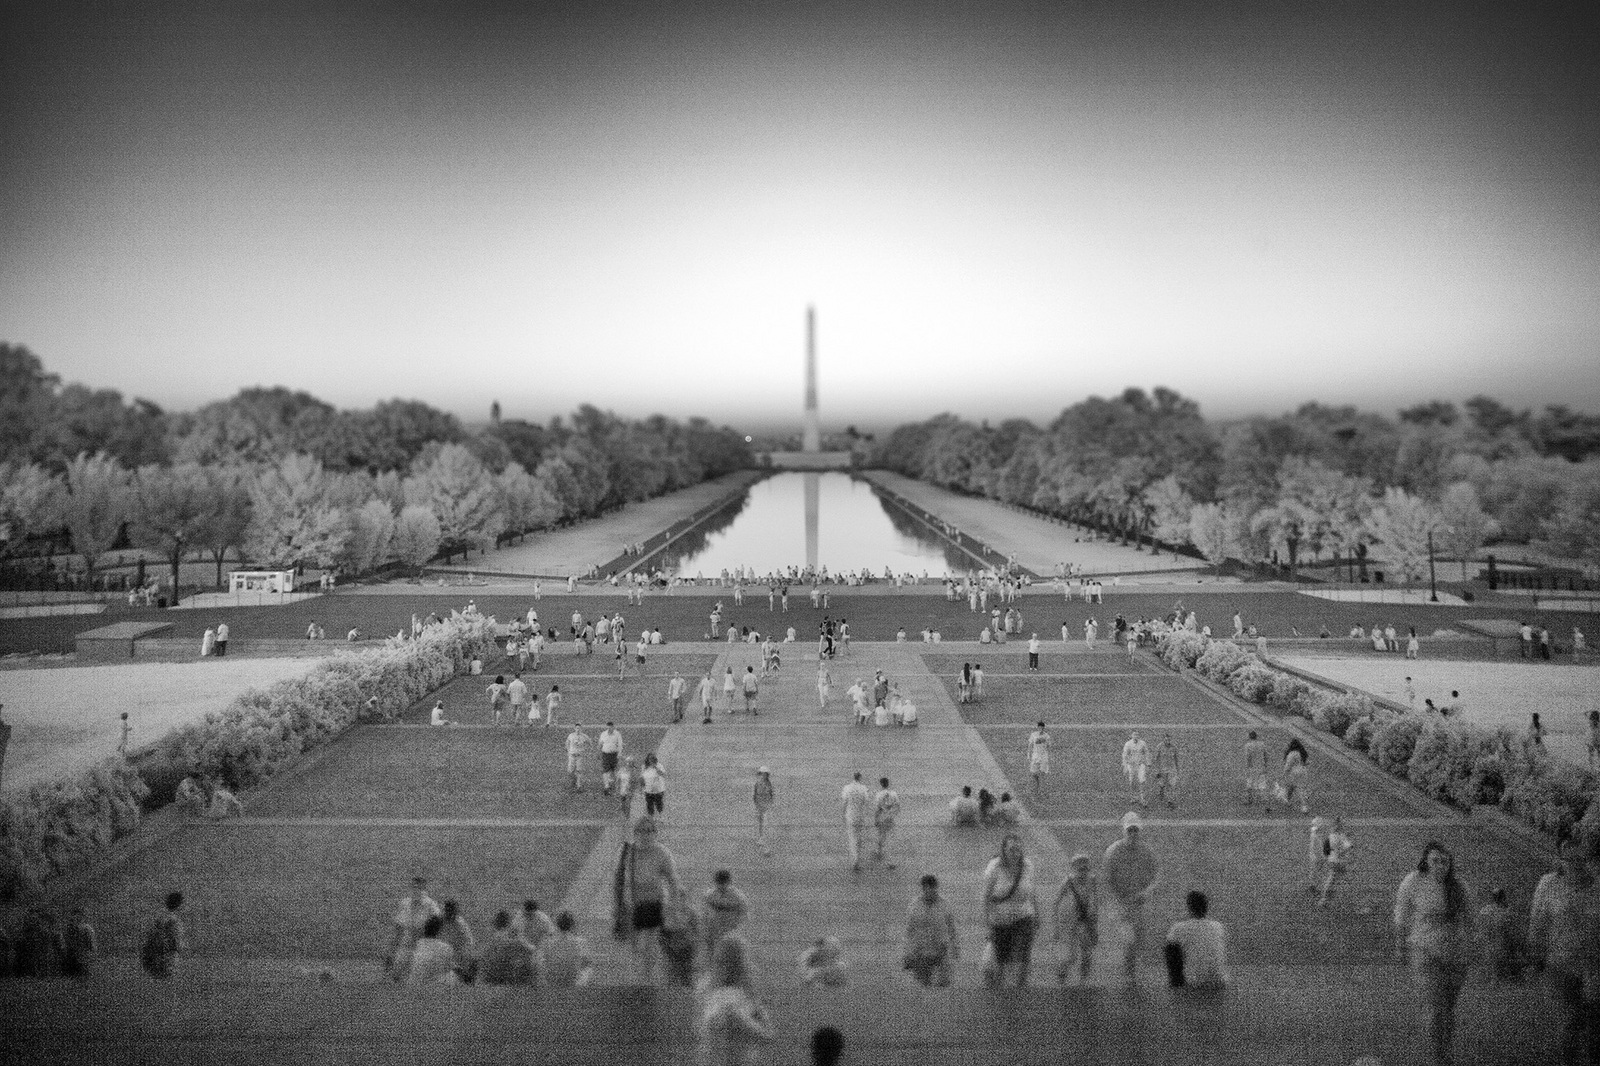 The National Mall in Washington is America's Front Yard, from one end of DC to the Other. : The National MALL : David Burnett | Photographer